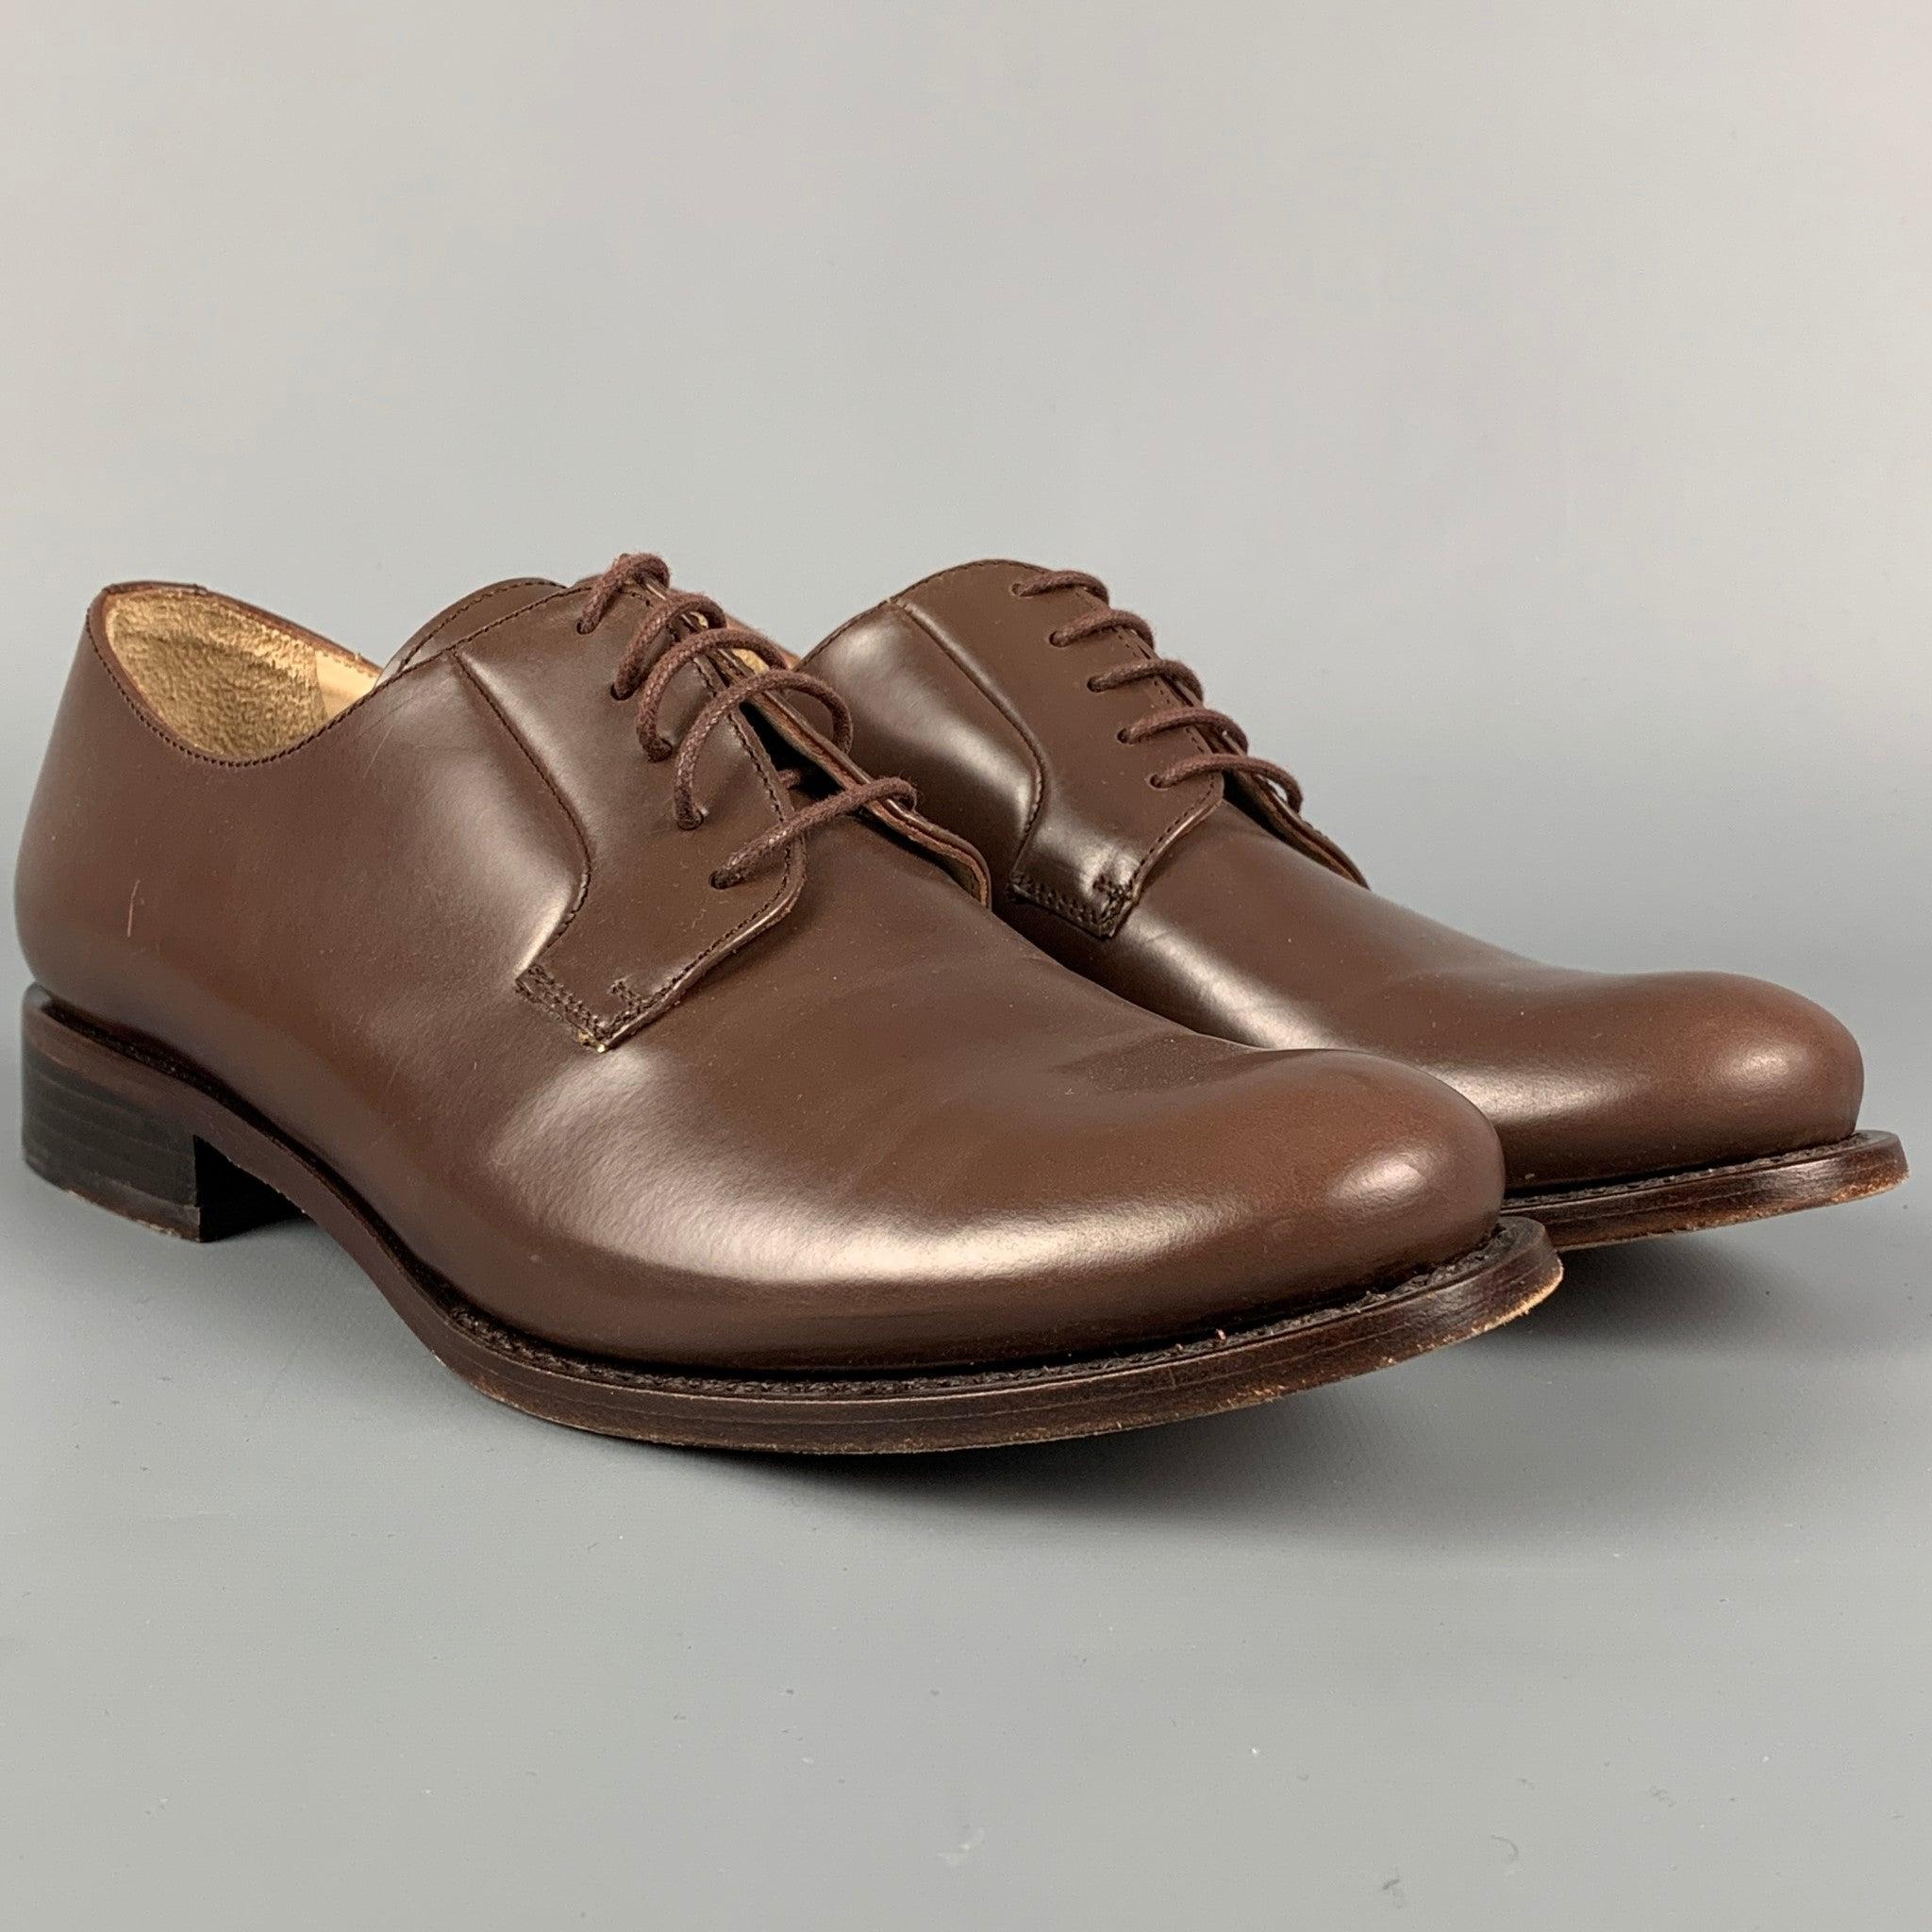 JIL SANDER shoes comes in a brown leather featuring a chunky heel and a lace up closure. Made in Italy.
Very Good
Pre-Owned Condition. 

Marked:   36.5Outsole: 10 inches  x 3.5 inches 
  
  
 
Reference: 113028
Category: Laces
More Details
   